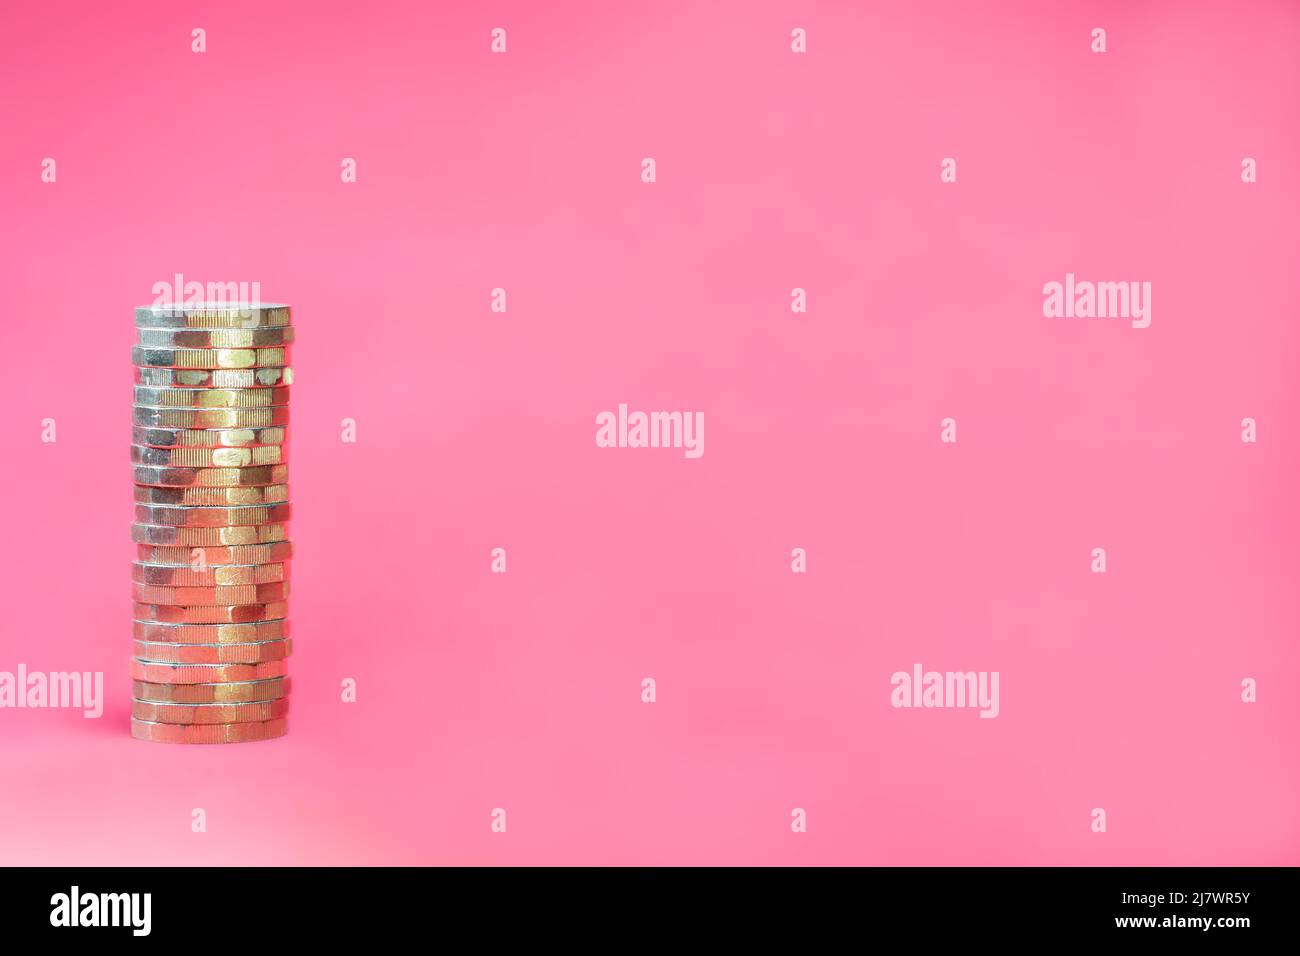 Single stack of gold coloured UK GBP sterling pound coins positioned left on a bright pink fuchsia background with copy space. Savings and Investments Stock Photo